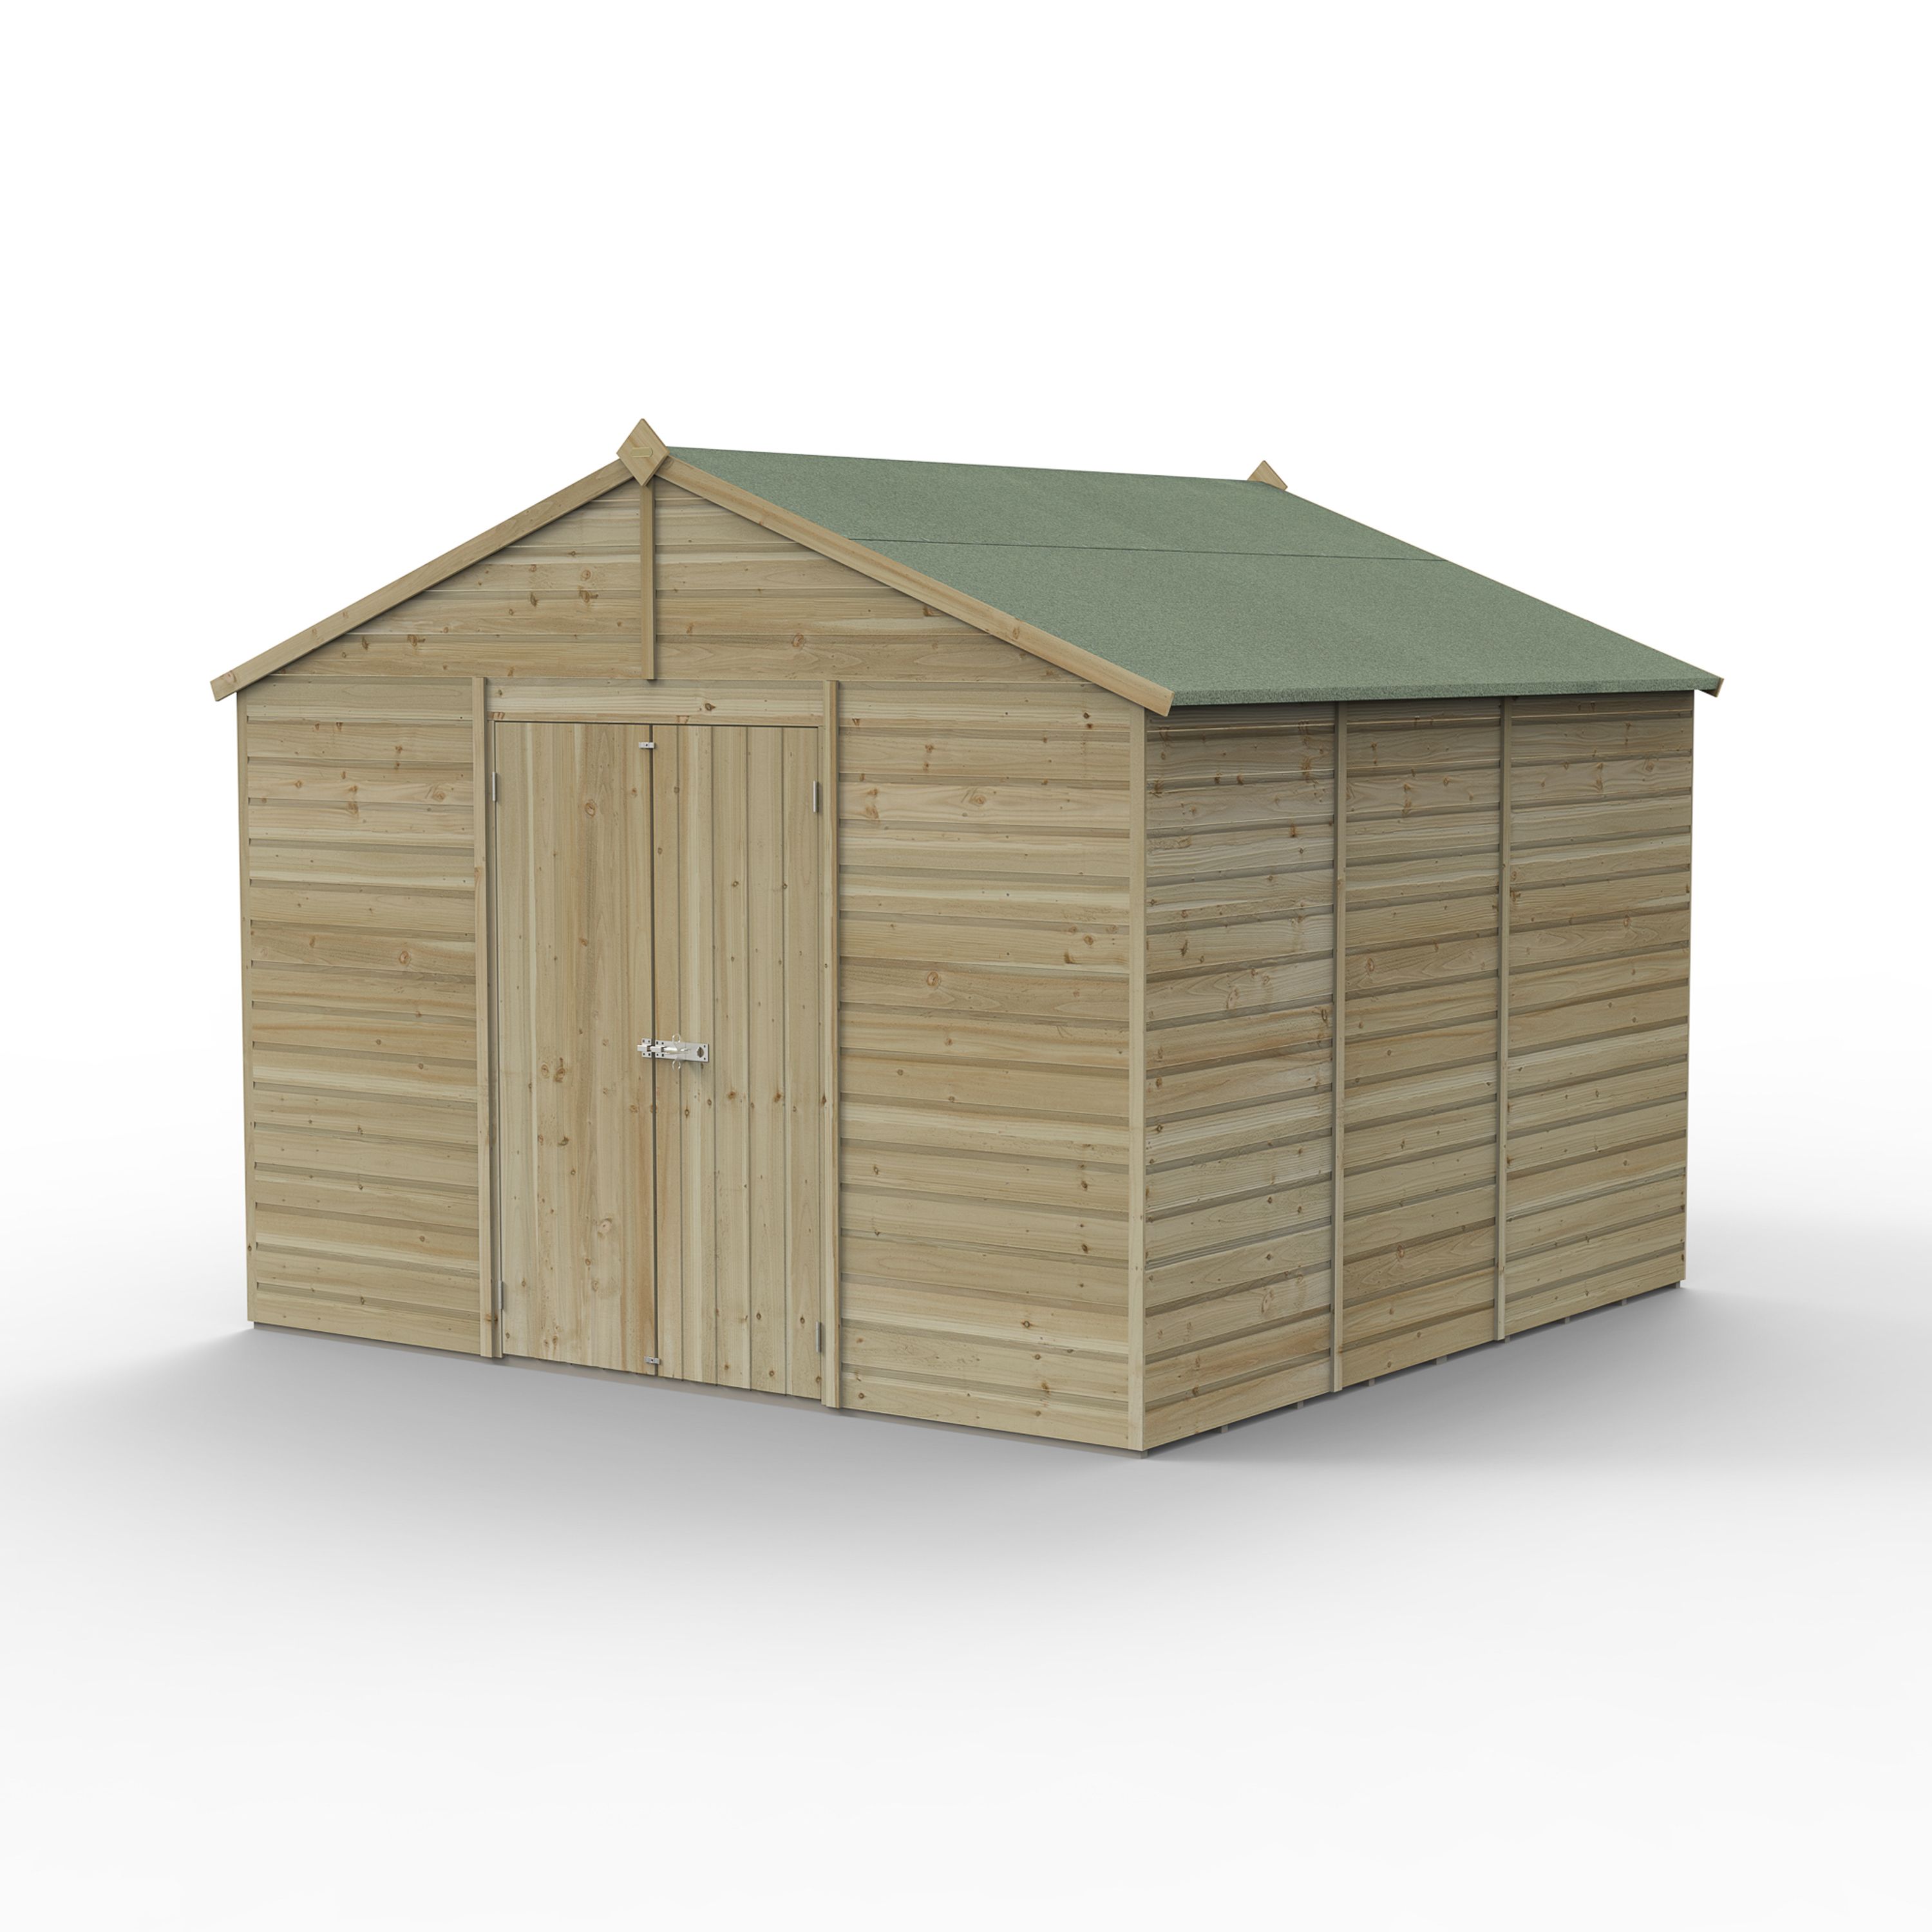 Forest Garden Beckwood 10x10 ft Apex Natural timber Wooden 2 door Shed with floor (Base included)